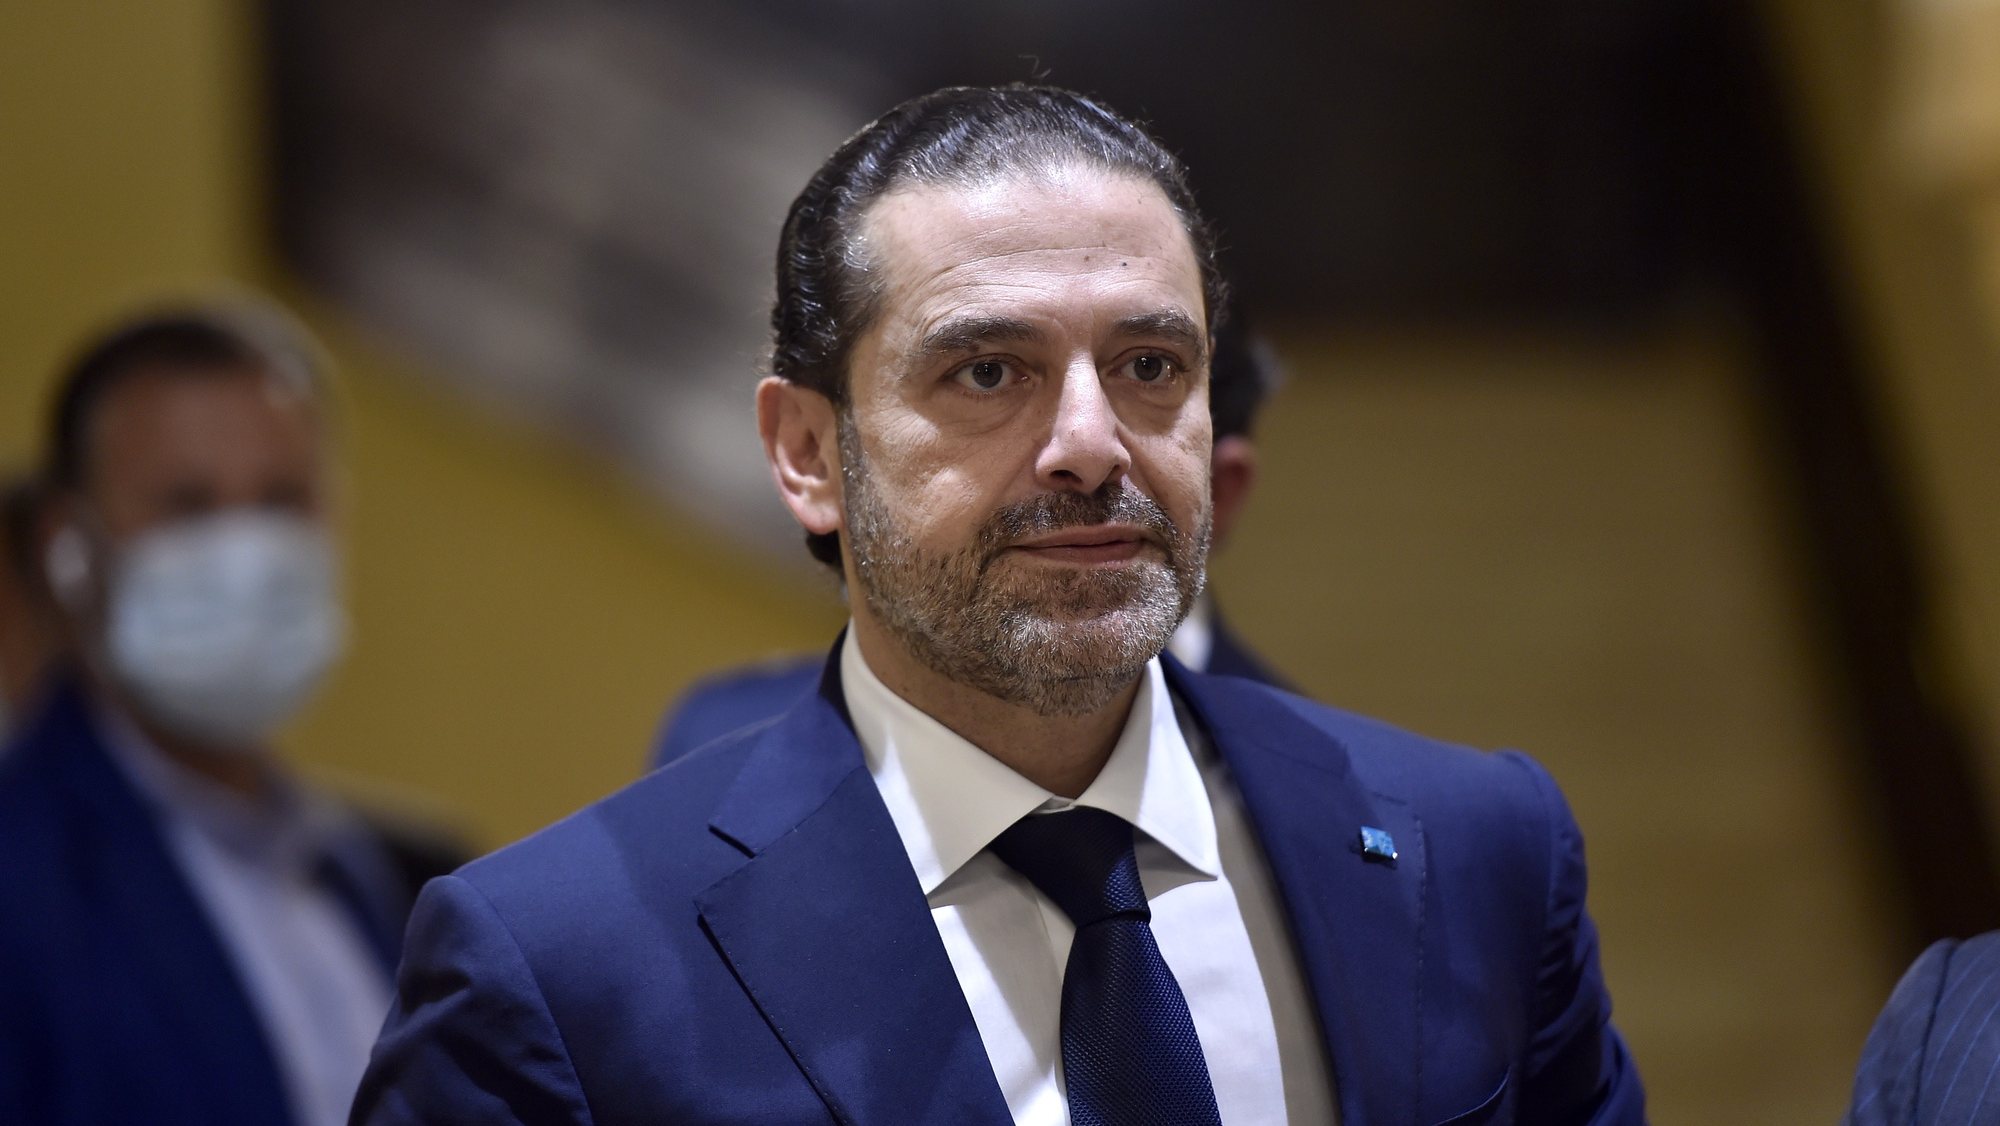 epa09346556 (FILE) - Lebanese Prime Minister-designate Saad Hariri waits before a meeting at his house in Beirut, Lebanon, 07 April 2021 (reissued 15 July 2021). Hariri, who was tasked nine months ago with forming the new government, said on 15 july he is stepping down a day after he presented the cabinet proposal to President Michel Aoun who has not accepted the government.  EPA/WAEL HAMZEH *** Local Caption *** 56811575